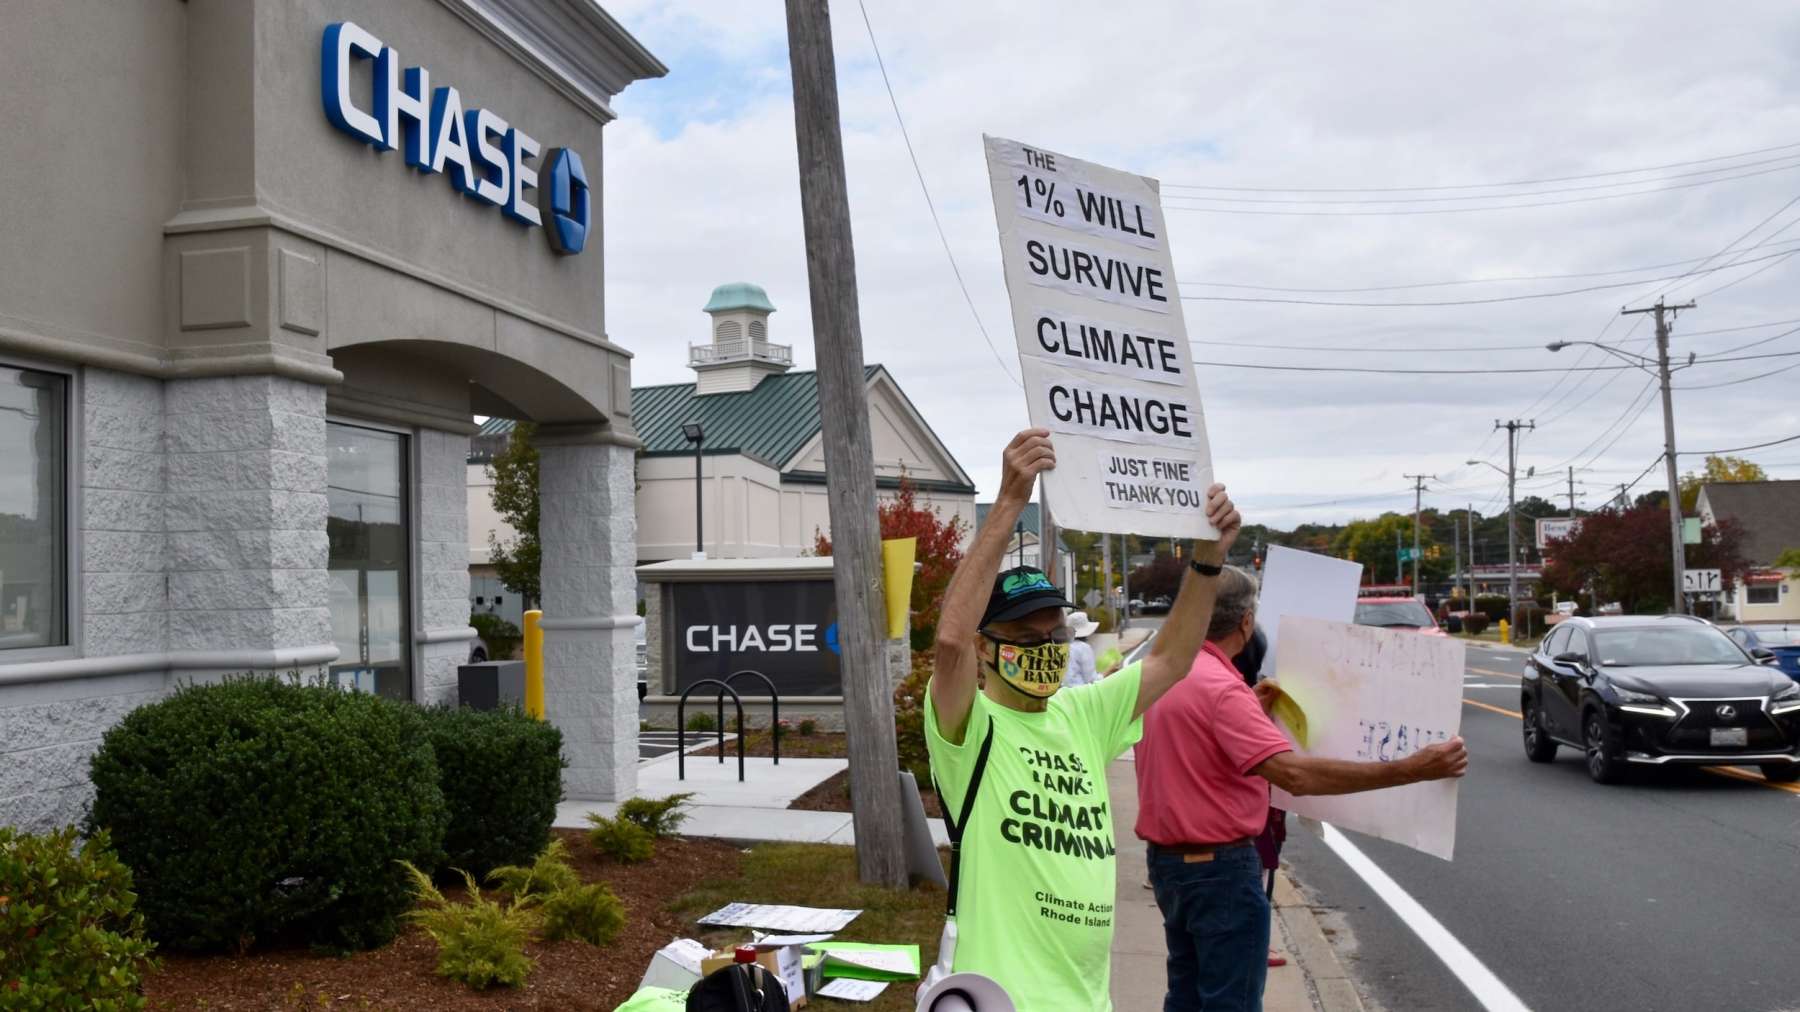 Saying no to ‘climate criminal’ Chase Bank in Wakefield